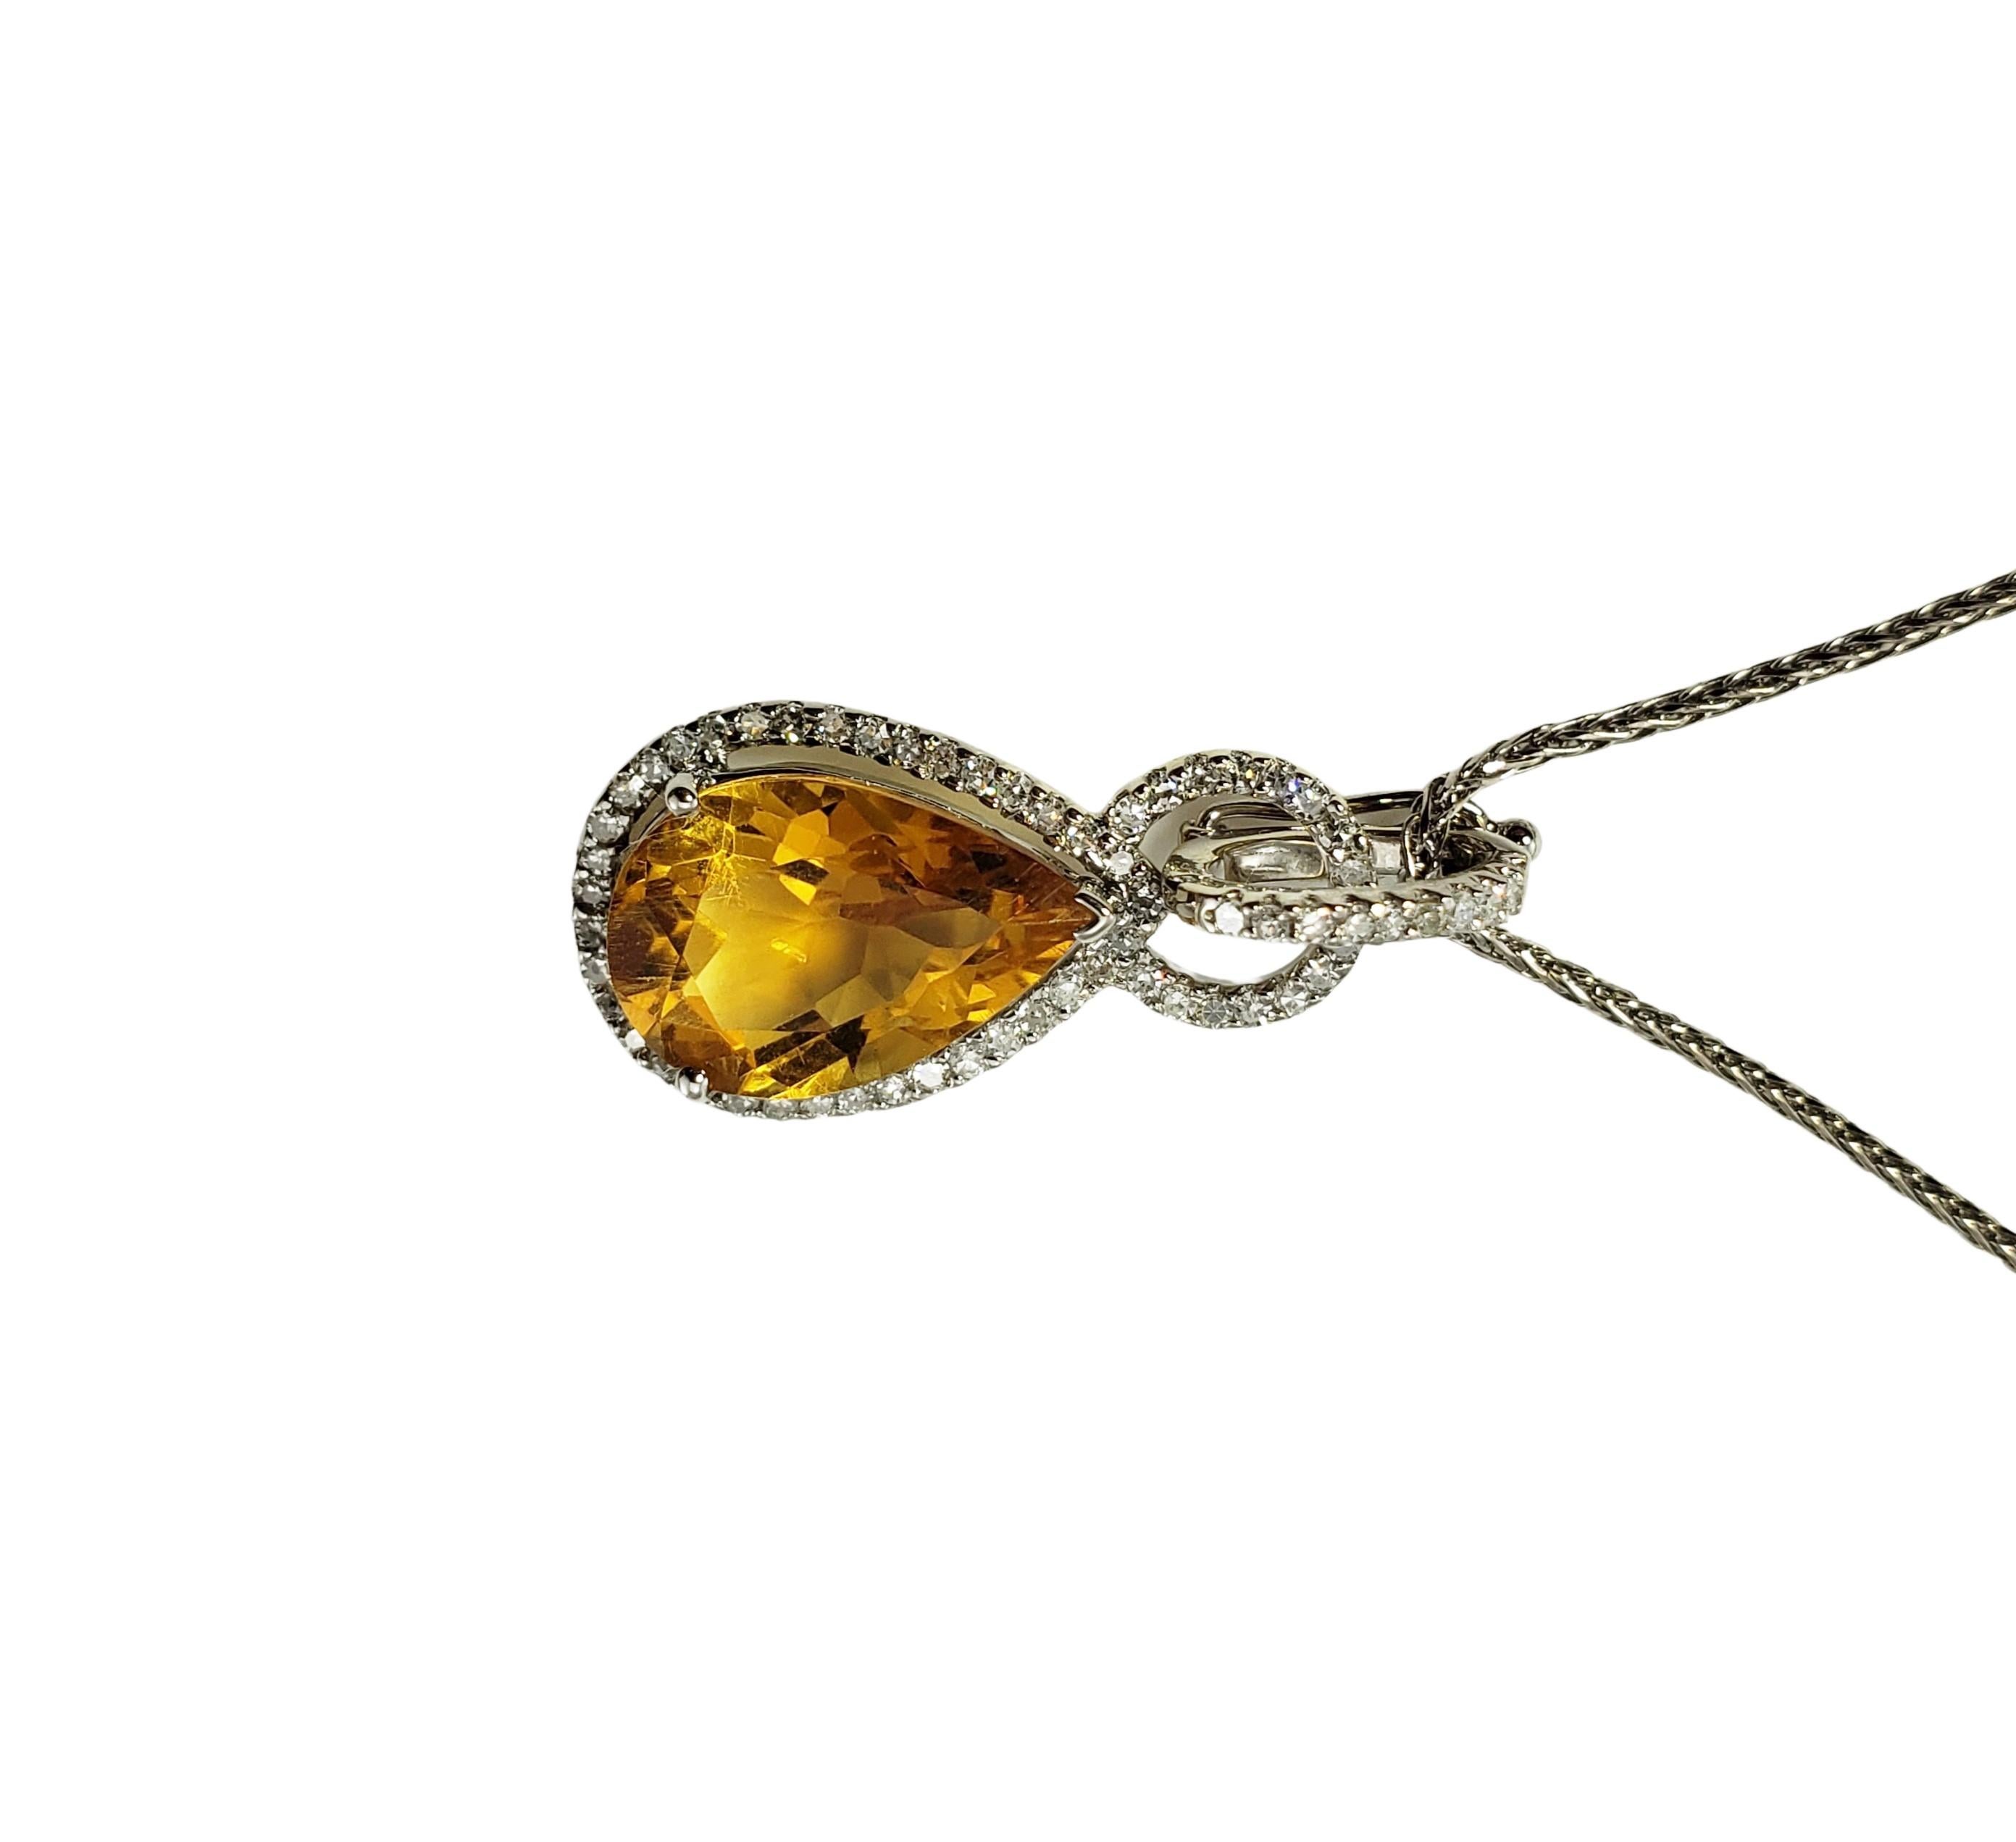 William Lam & Co. 14 Karat Yellow Gold Citrine and Diamond Pendant Necklace-

This lovely pendant necklace features one pear shaped citrine (13 mm x 8 mm) surrounded by 59 round single cut diamonds set in classic 14K white gold.  

Approximate total